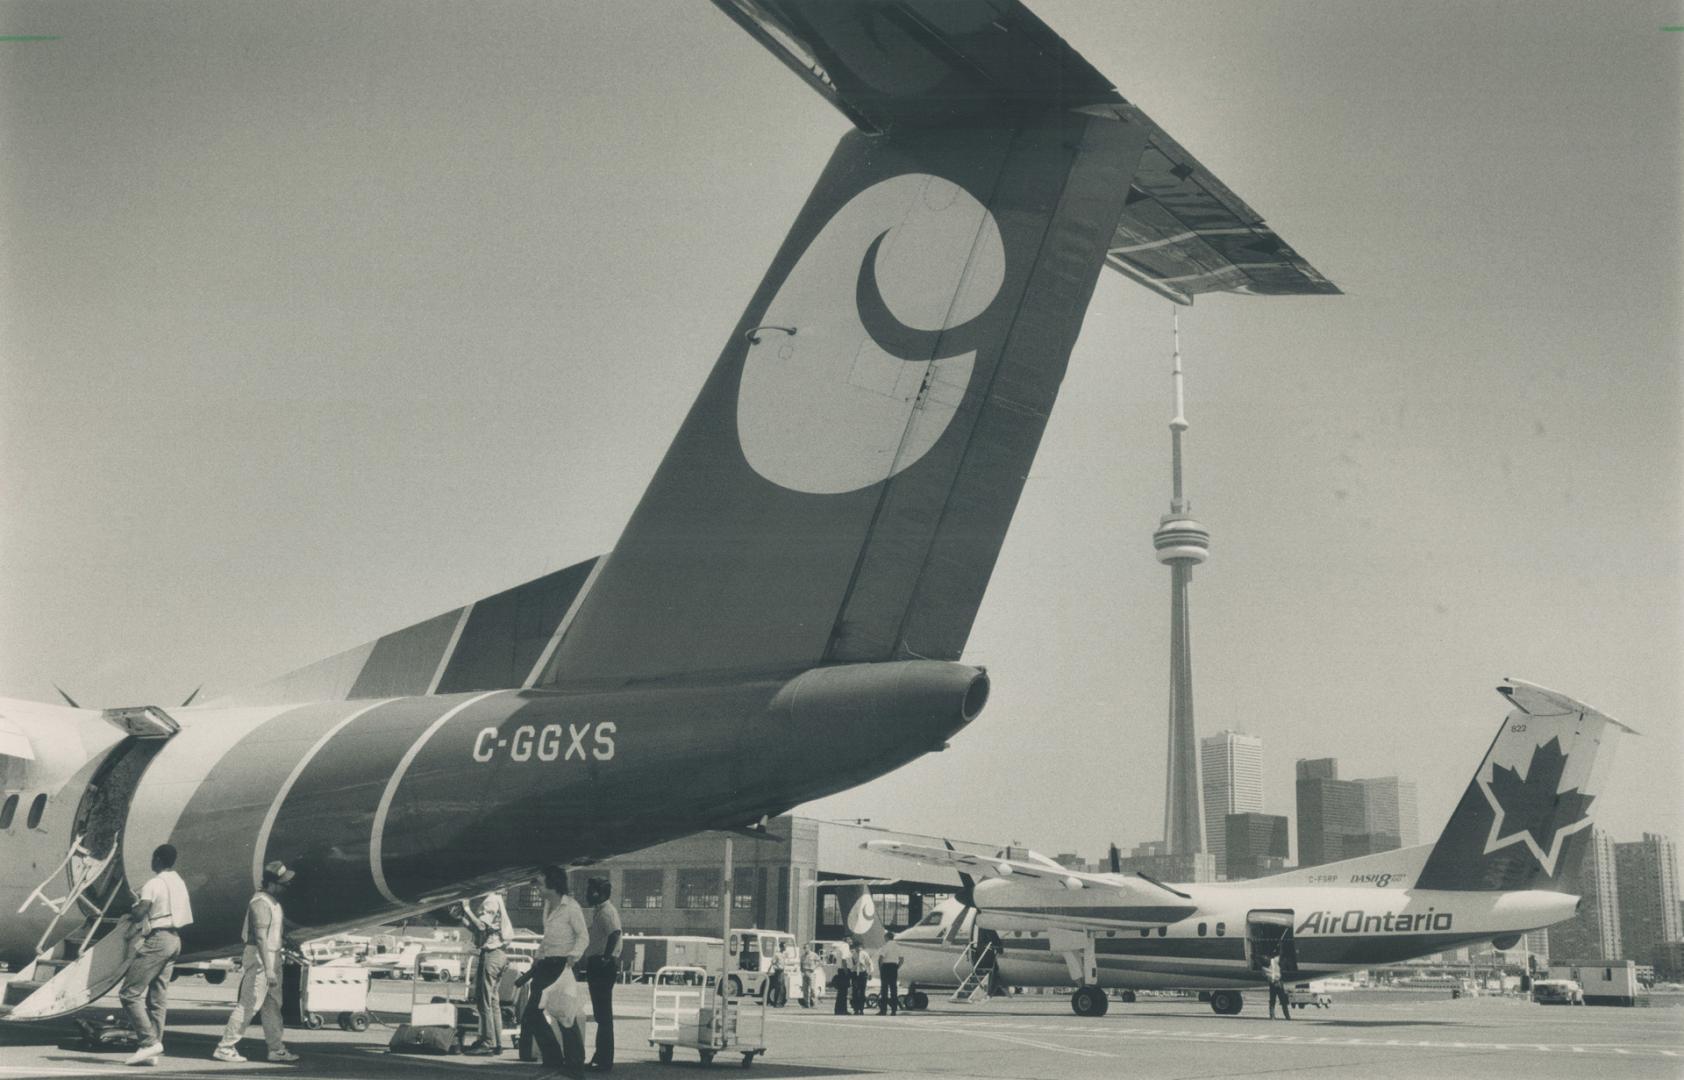 Flying low. City Express' Dash-7's are carrying the load after its Dash-8s, above, were seized by creditors. Air Ontario, which also flies to Montreal(...)